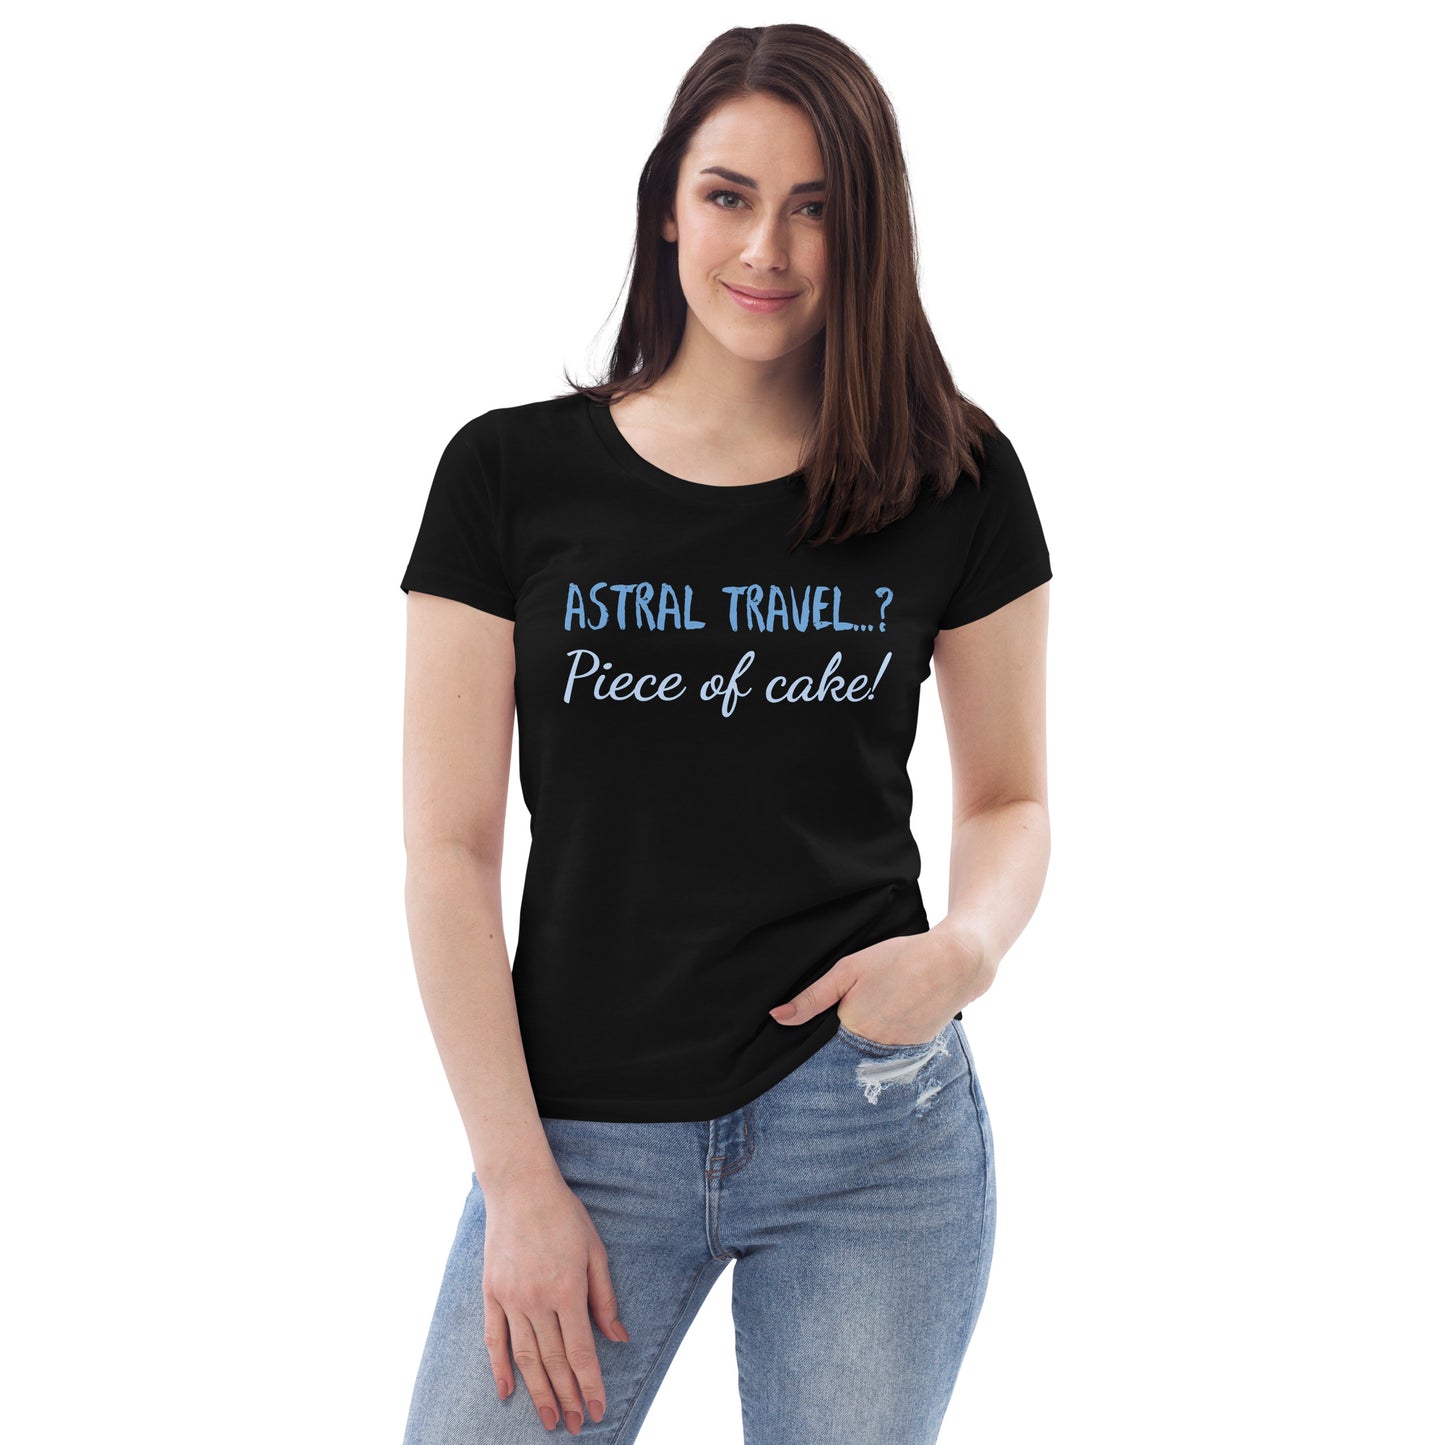 Astral travel, t-shirt